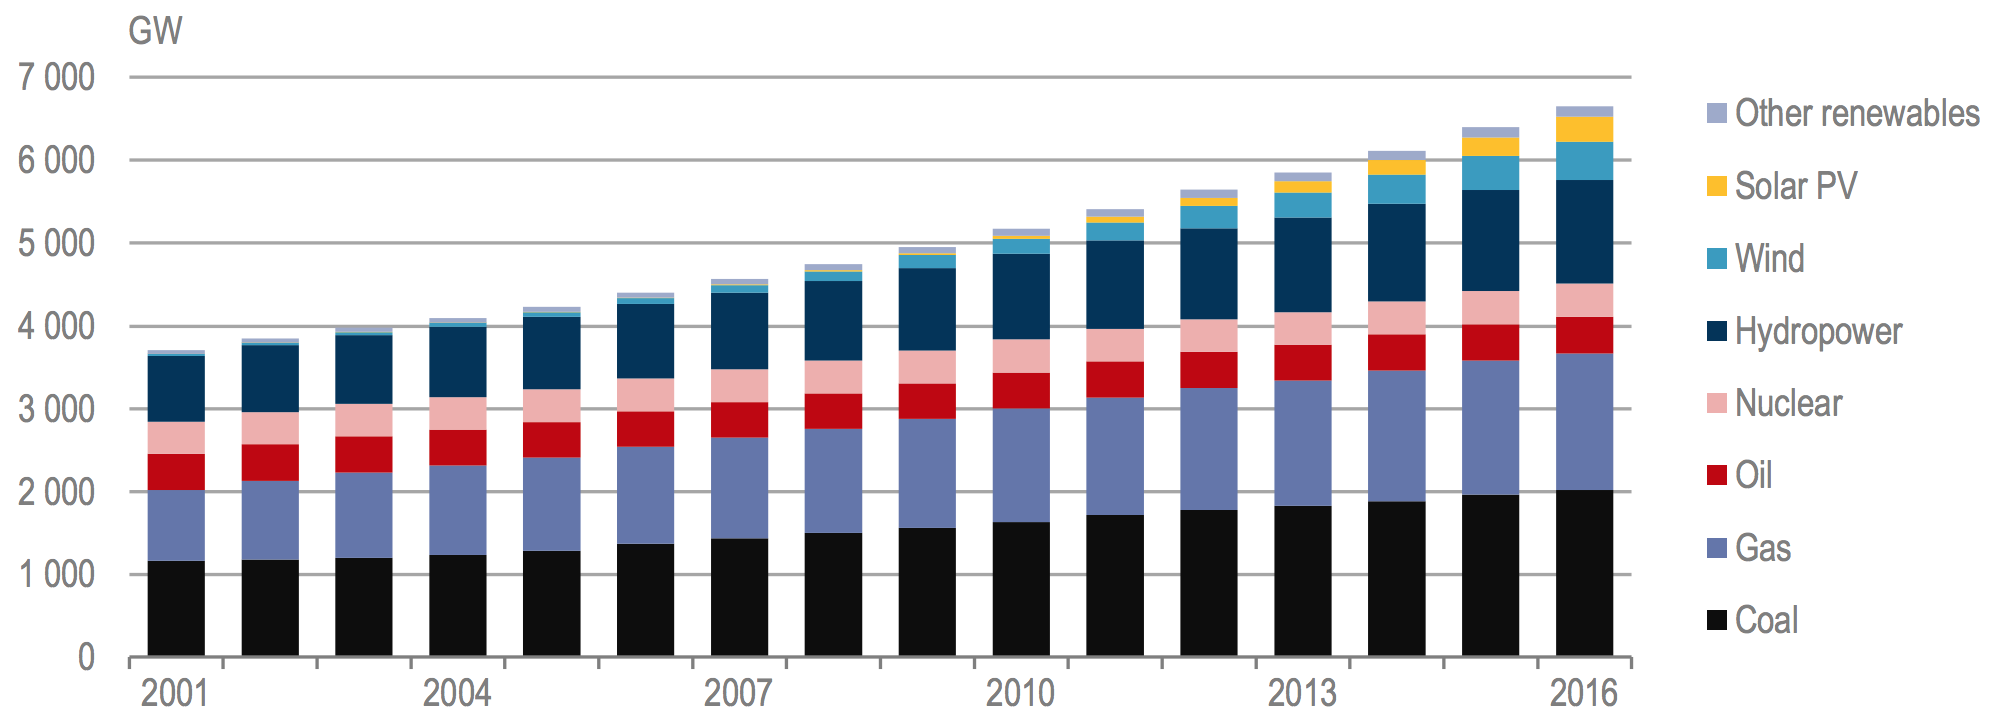 Figure 5: Fuel contribution to total global electricity capacity